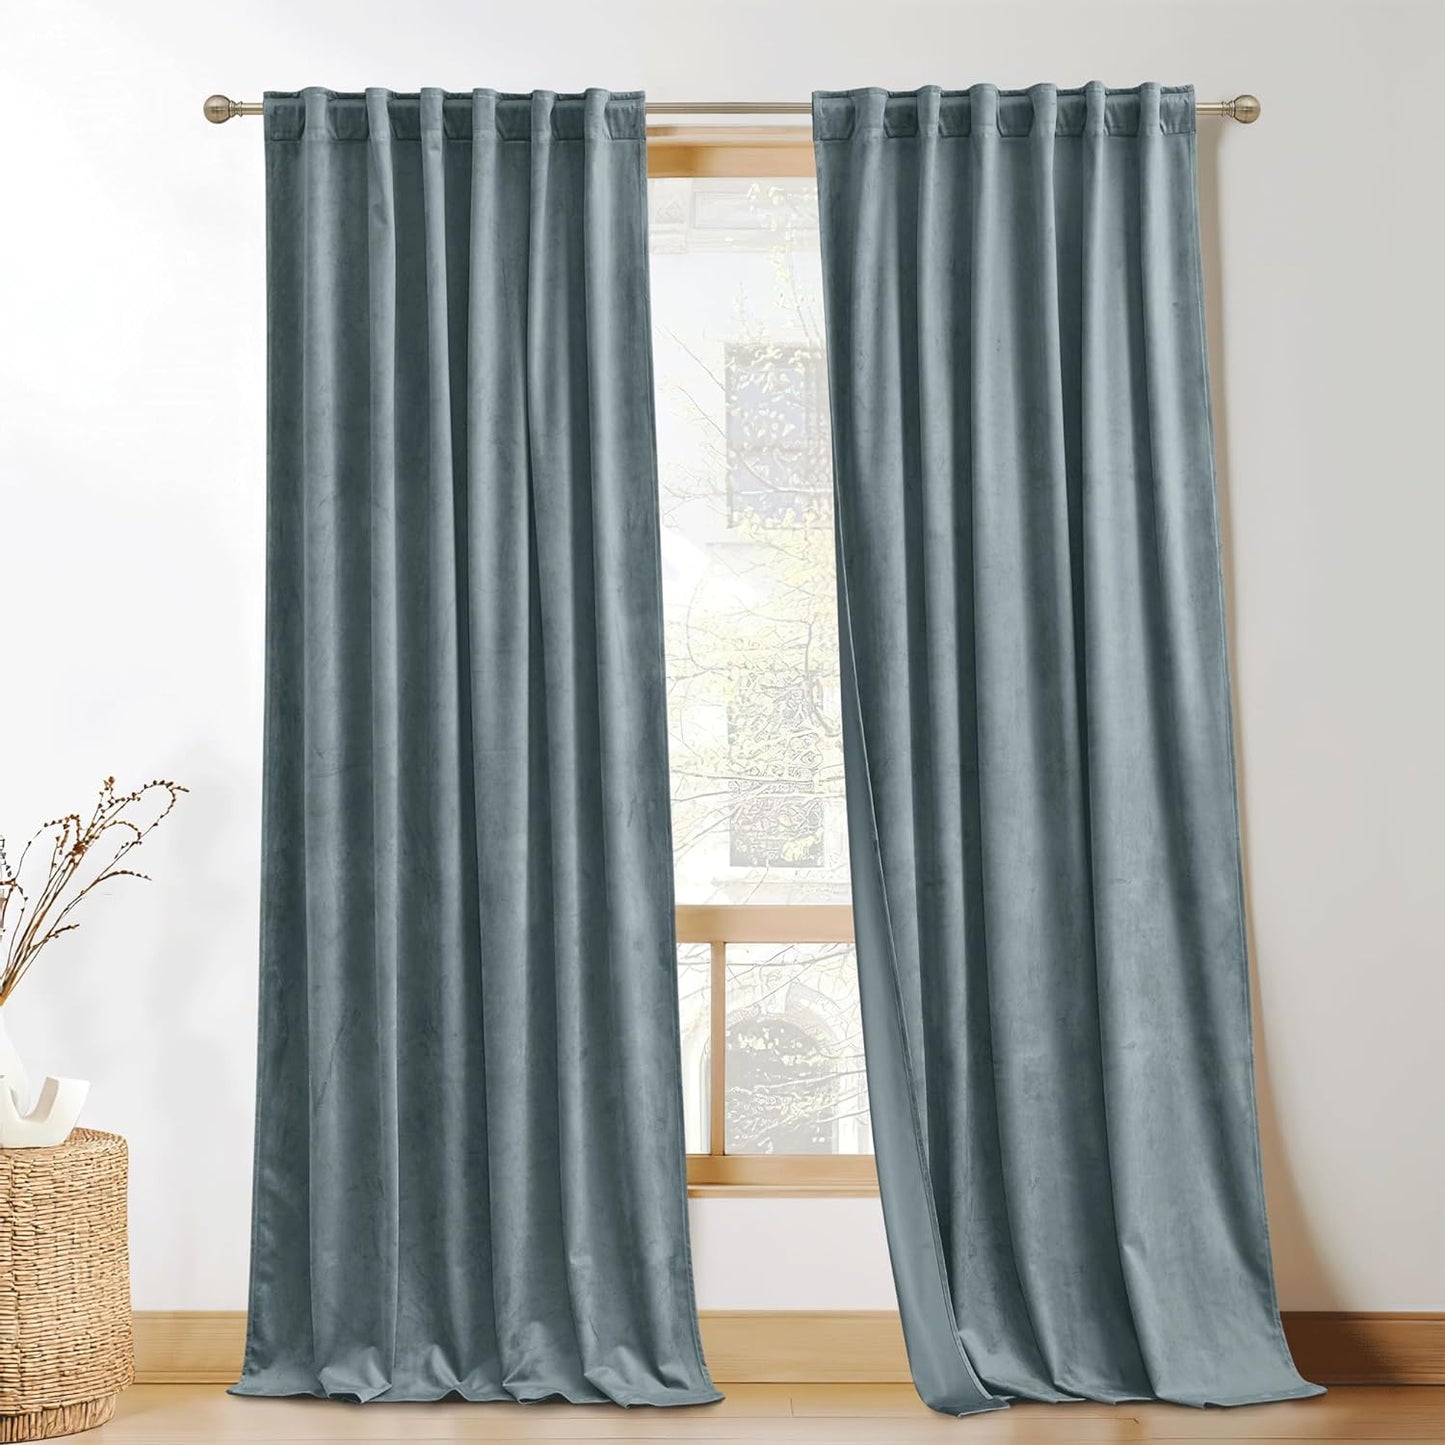 KGORGE Green Velvet Curtains 84 Inches Super Soft Room Darkening Thermal Insulating Window Curtains & Drapes for Bedroom Living Room Backdrop Holiday Christmas Decor, Hunter Green, W 52 X L 84, 2 Pcs  KGORGE Stone Blue W 52 X L 96 